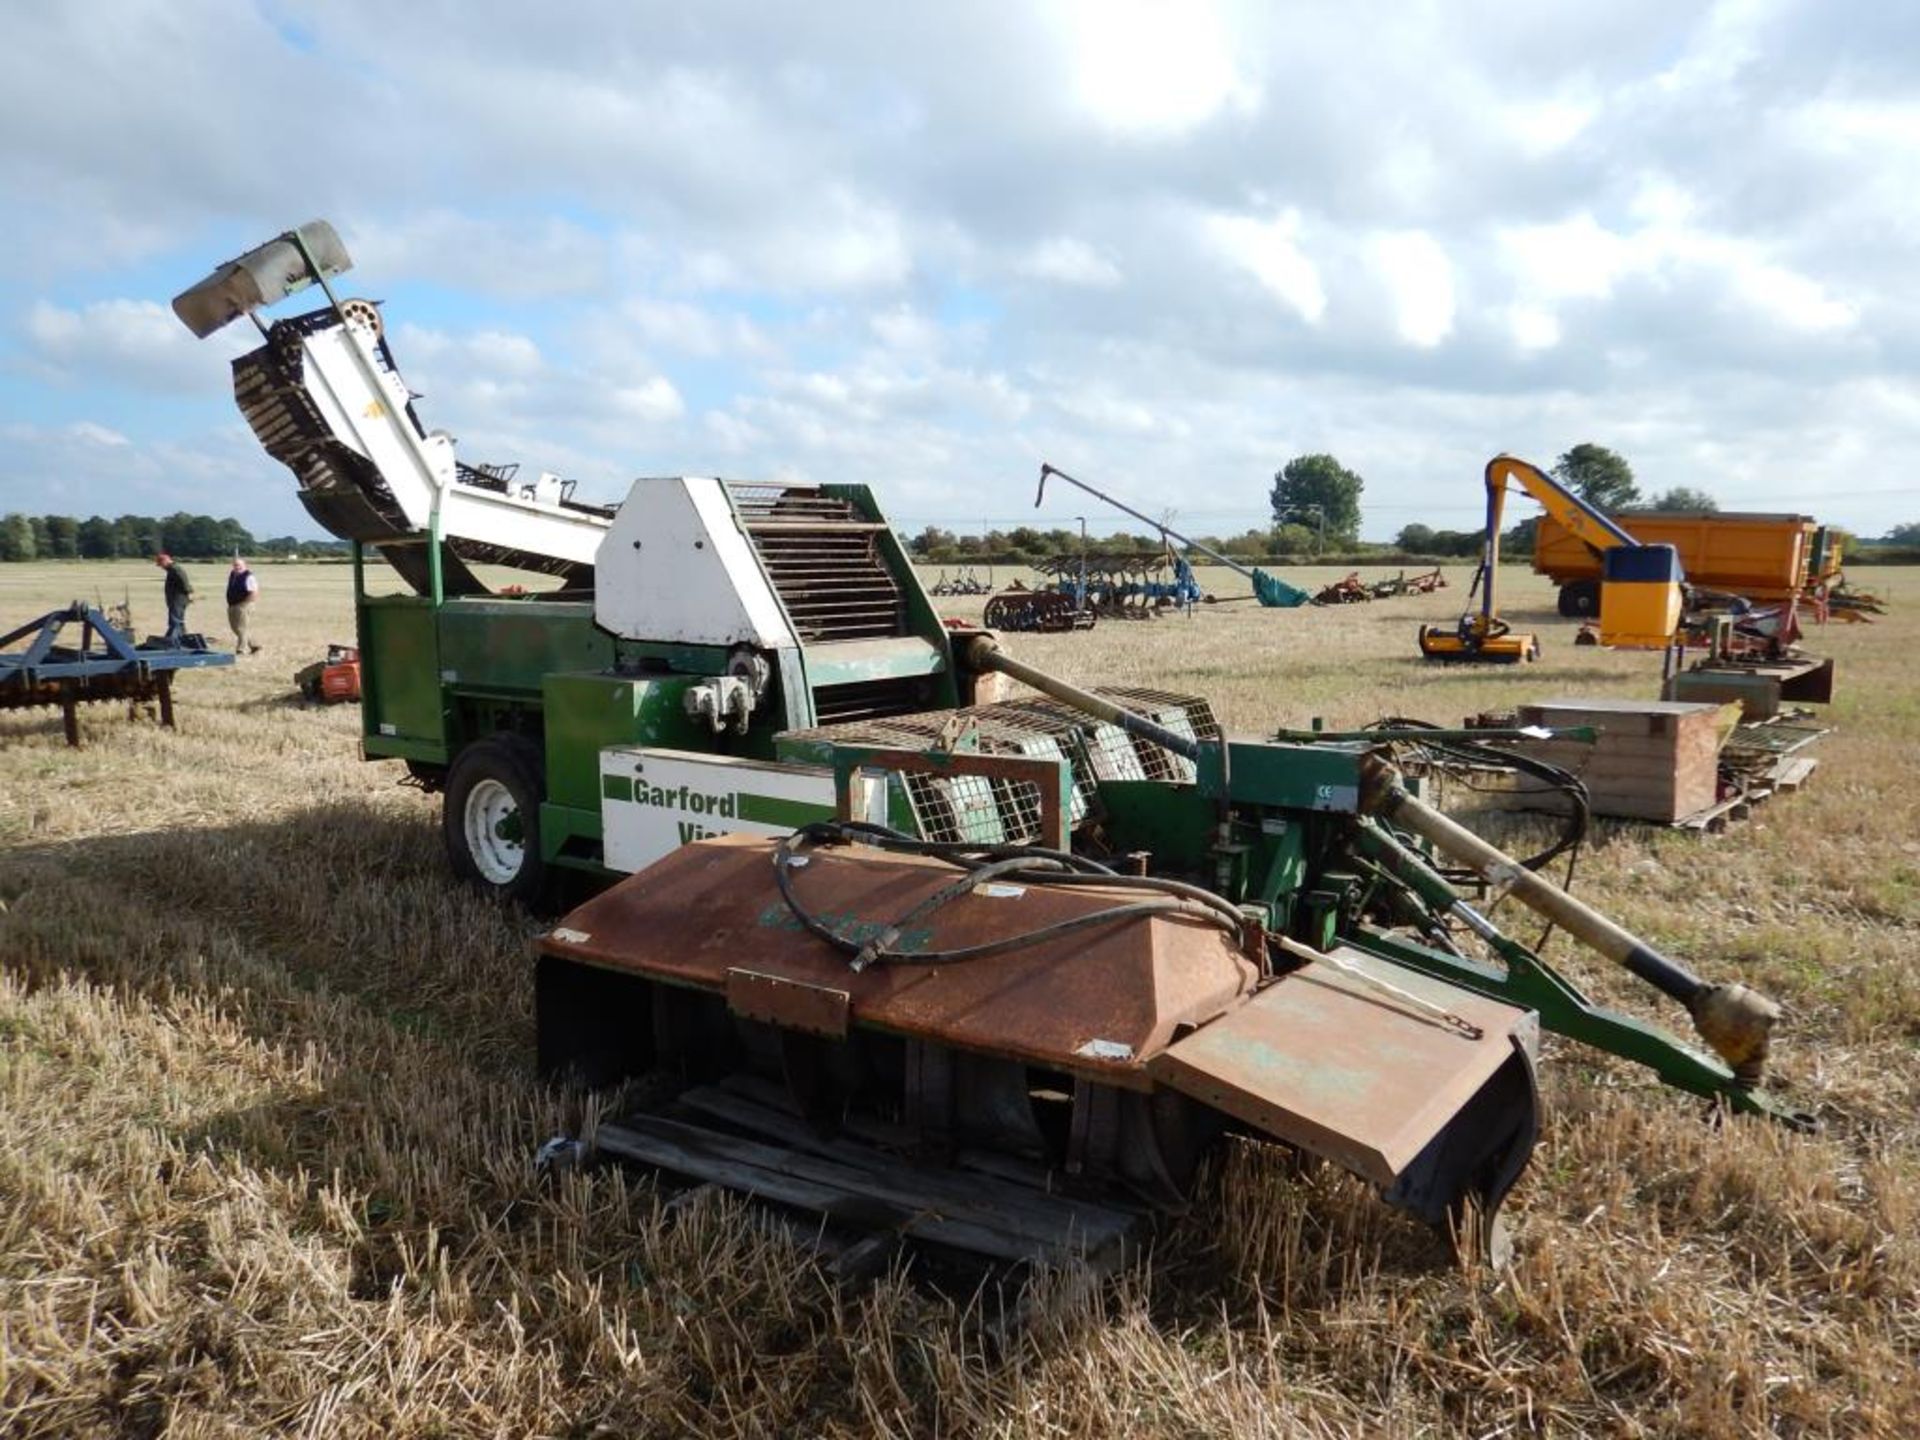 Garford Victor 4row trailer sugar beet harvester with Garford front mounted haulm topper Serial